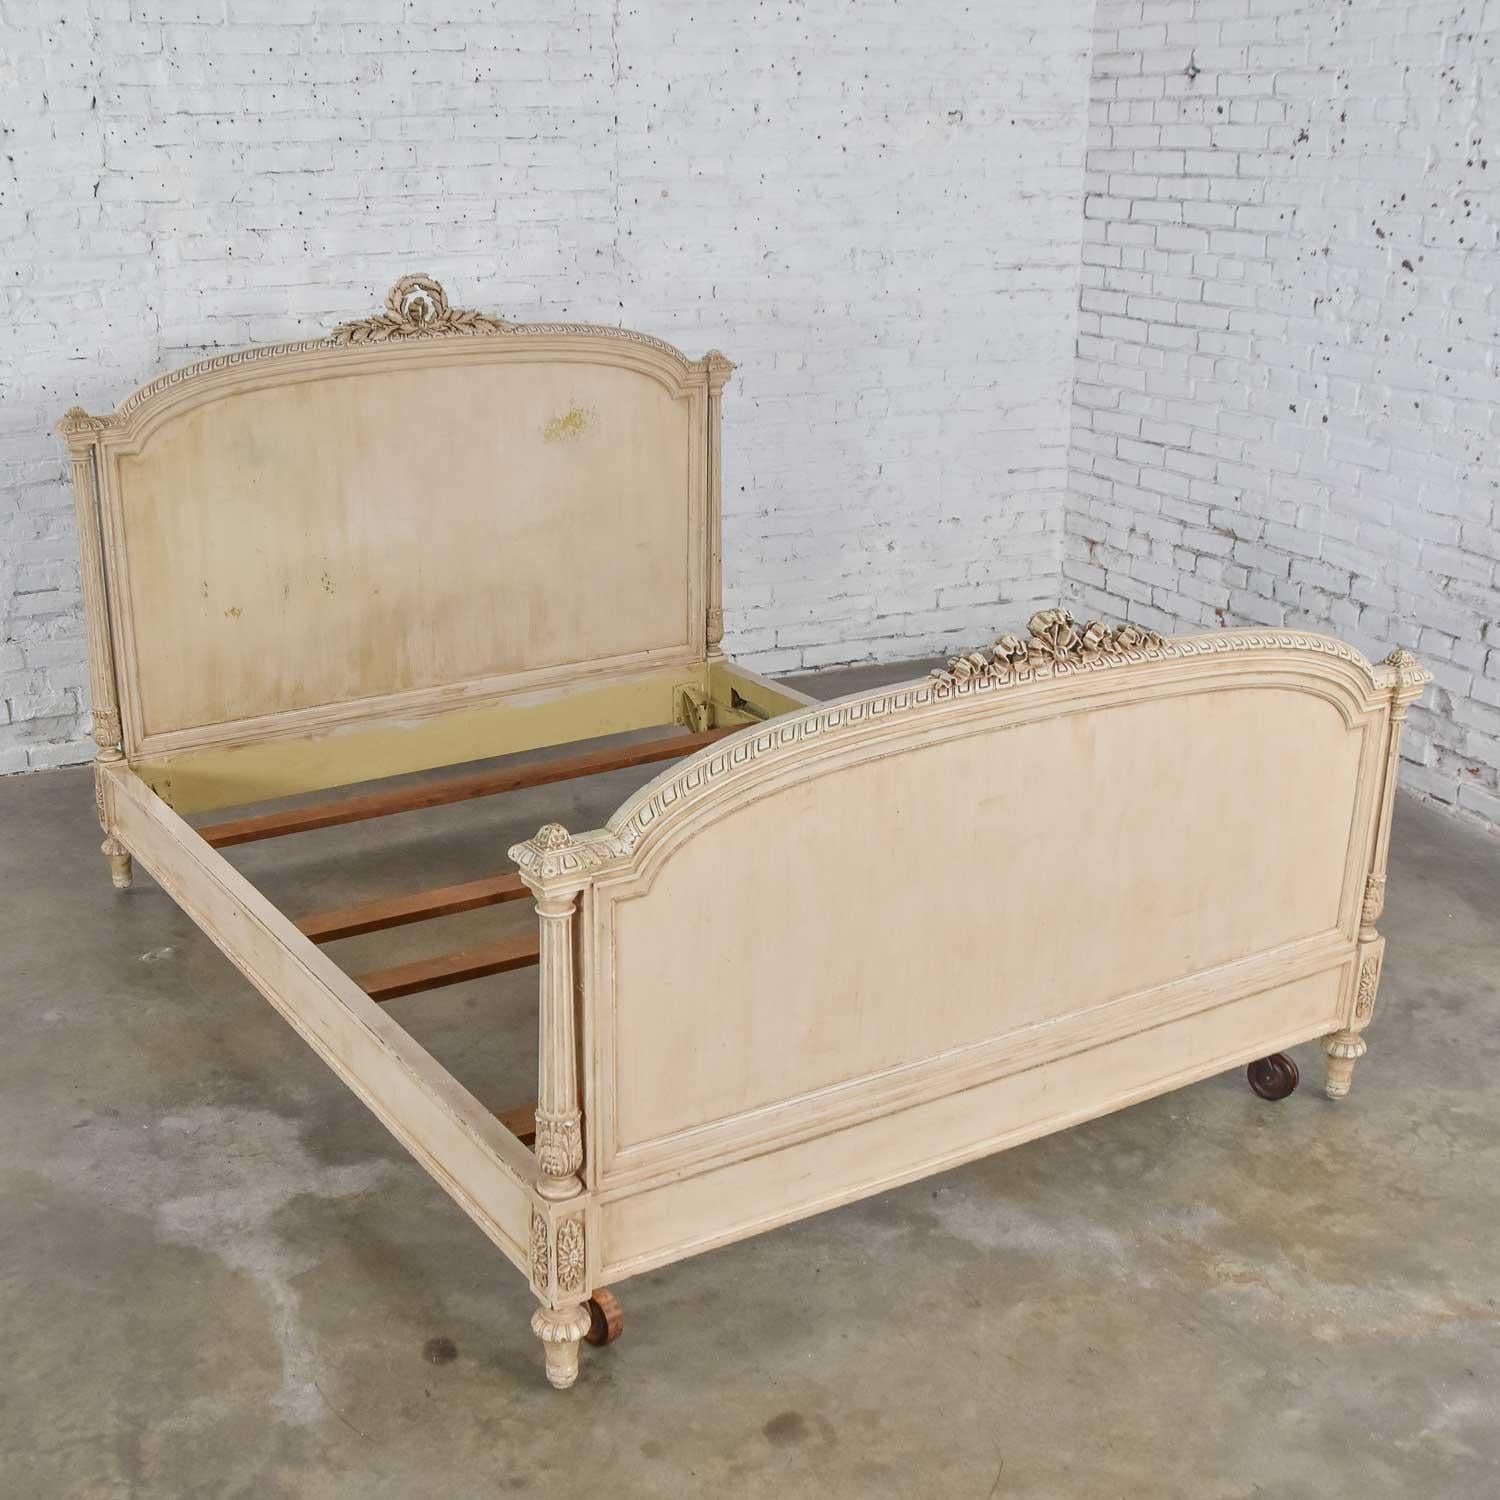 Phenomenal Louis XVI style French off-white painted, antiqued, and distressed queen size bed. Comprised of a carved wood headboard, footboard, side rails, slats, and large wooden casters. Wonderful antique condition with definite nicks and wear in